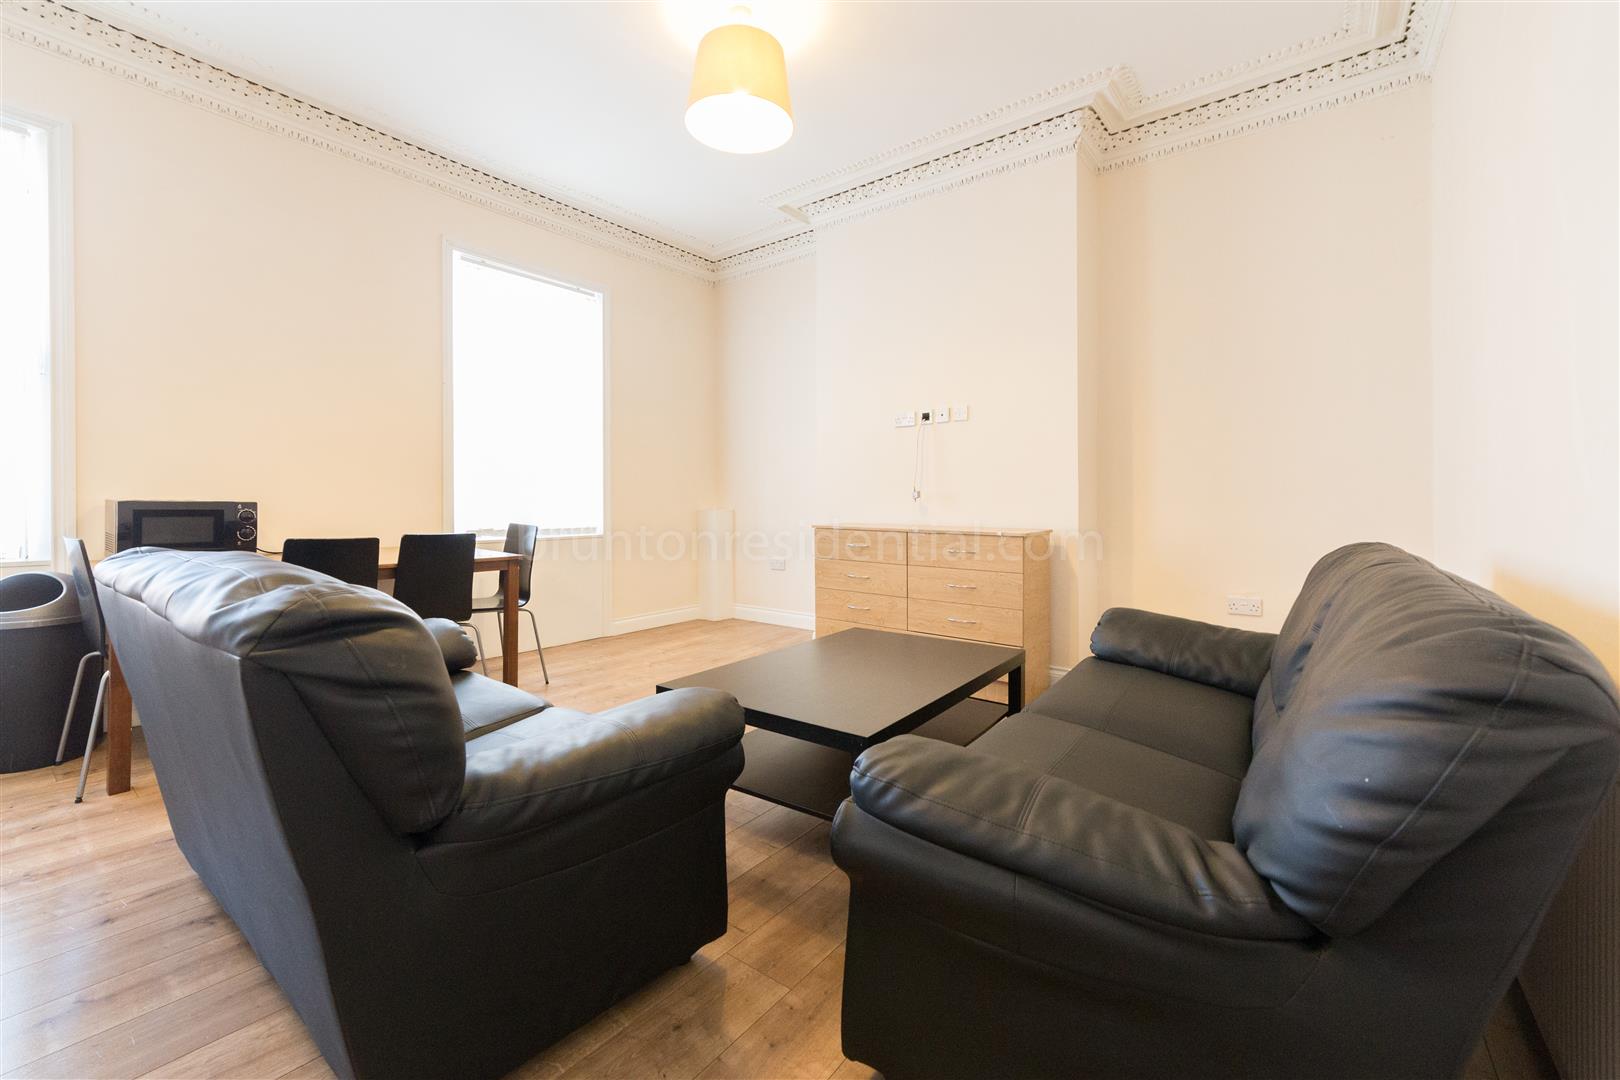 4 bed maisonette to rent in Chillingham Road, Newcastle Upon Tyne  - Property Image 4